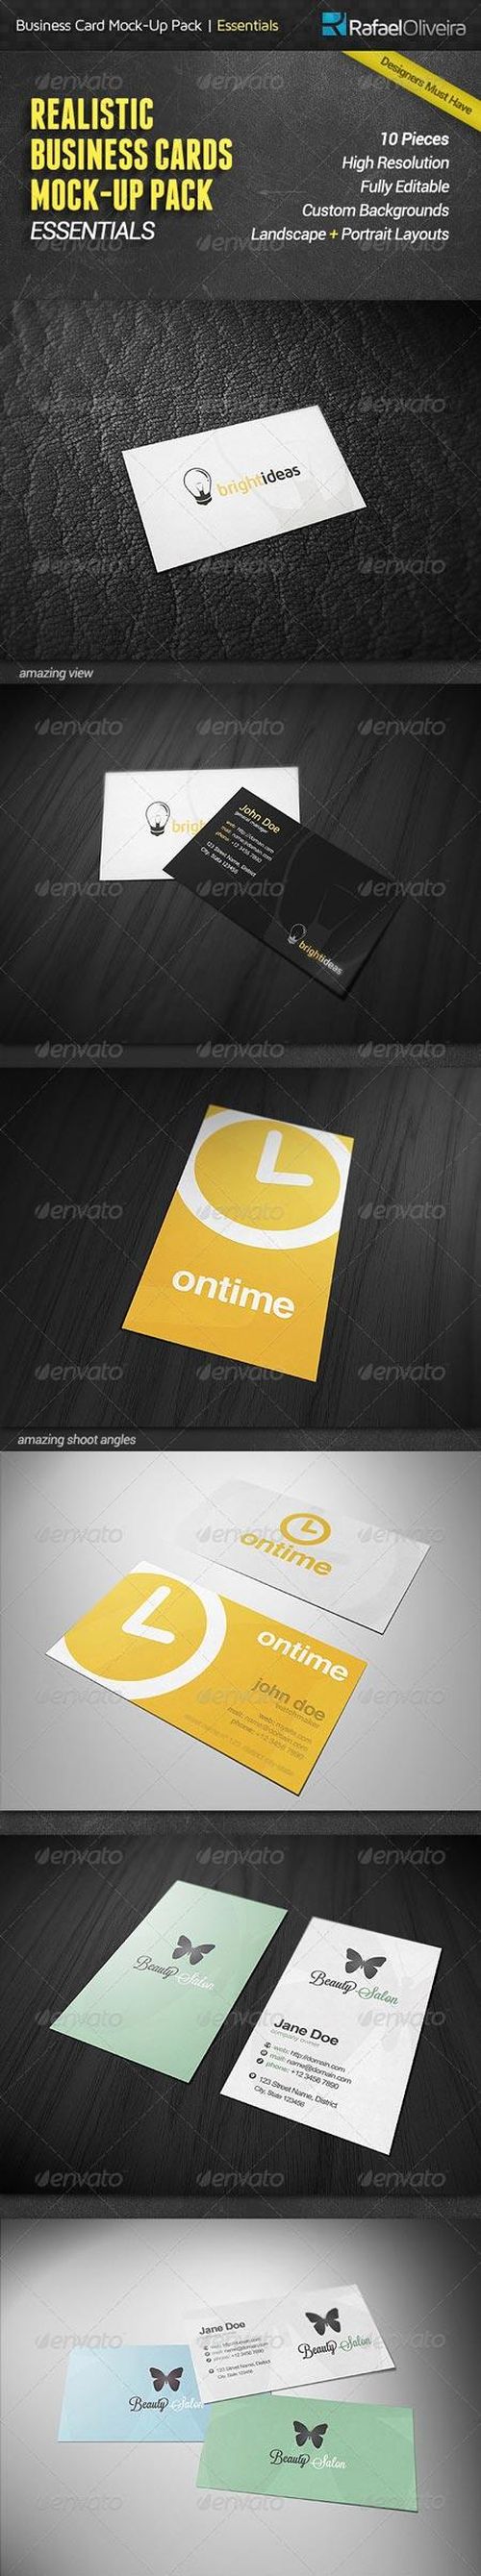 PSD - Business Cards Mock-Up Pack Essentials